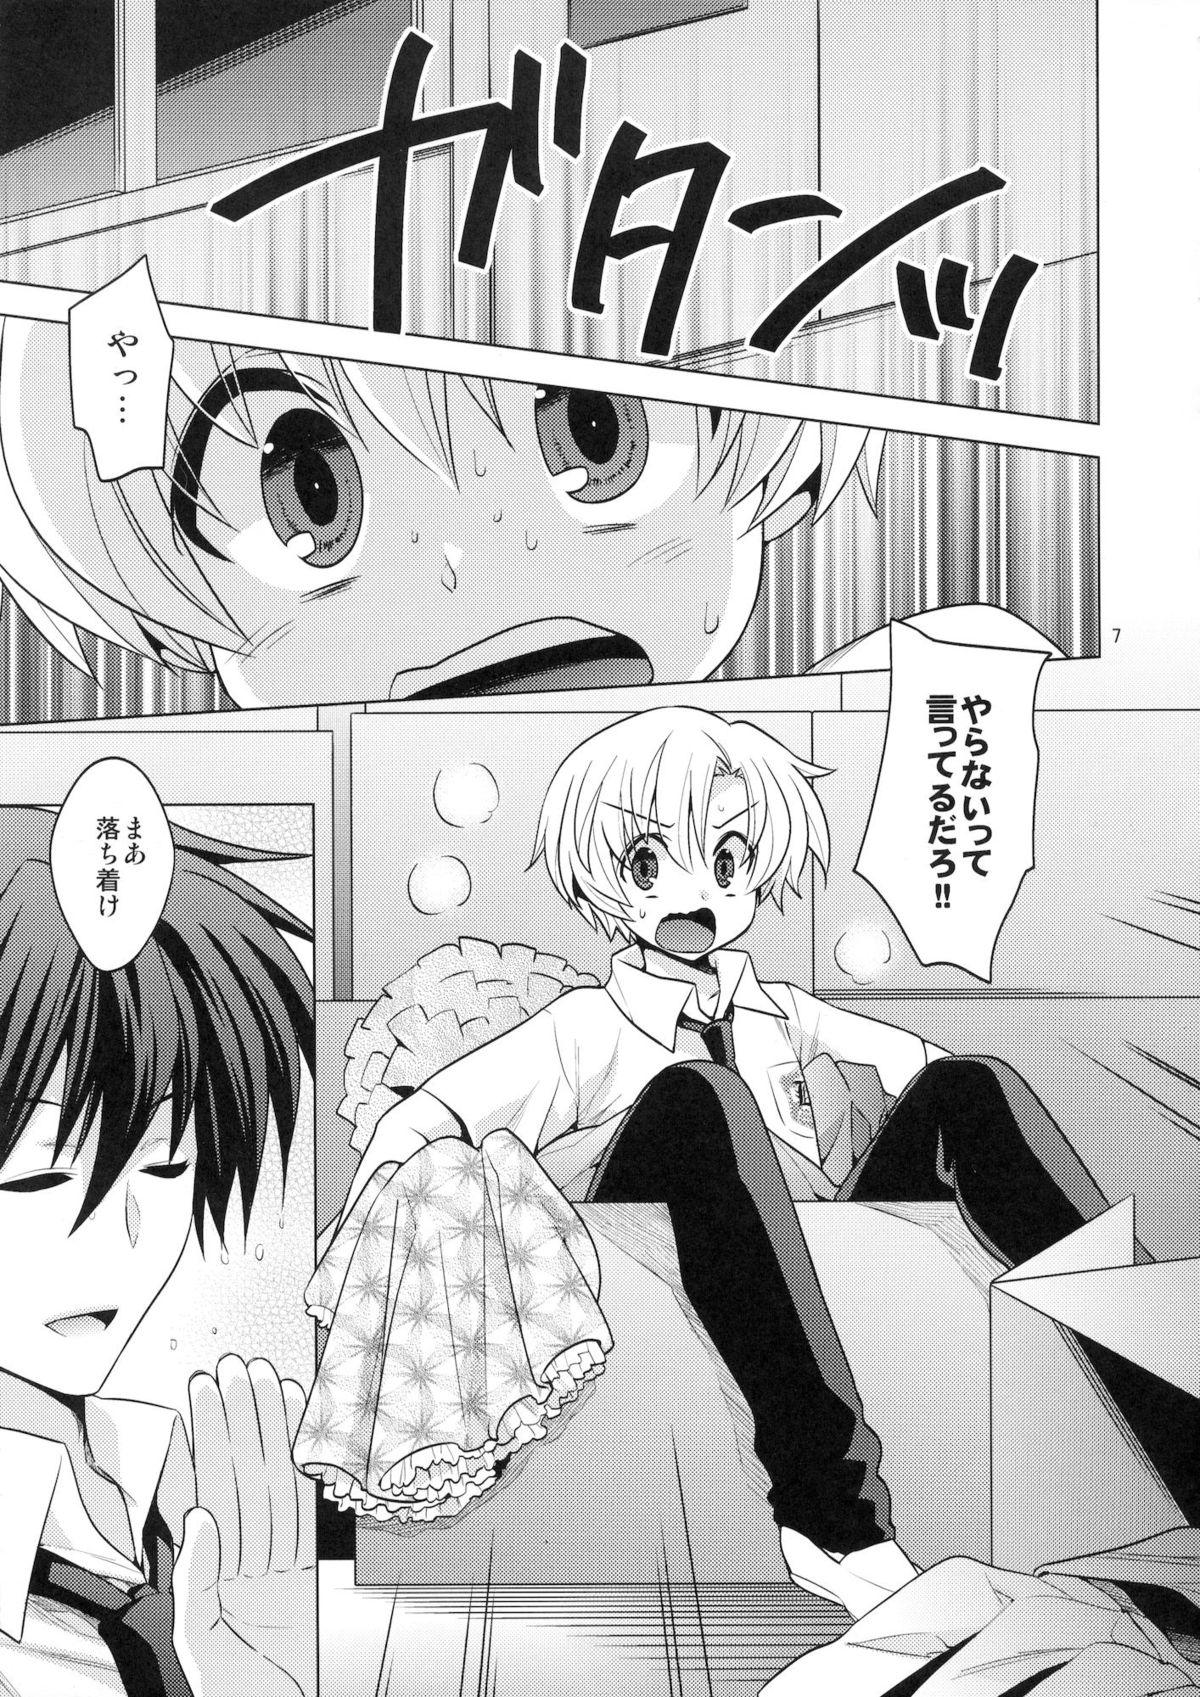 Facials Sunohara Mania 6 - Clannad Reversecowgirl - Page 5